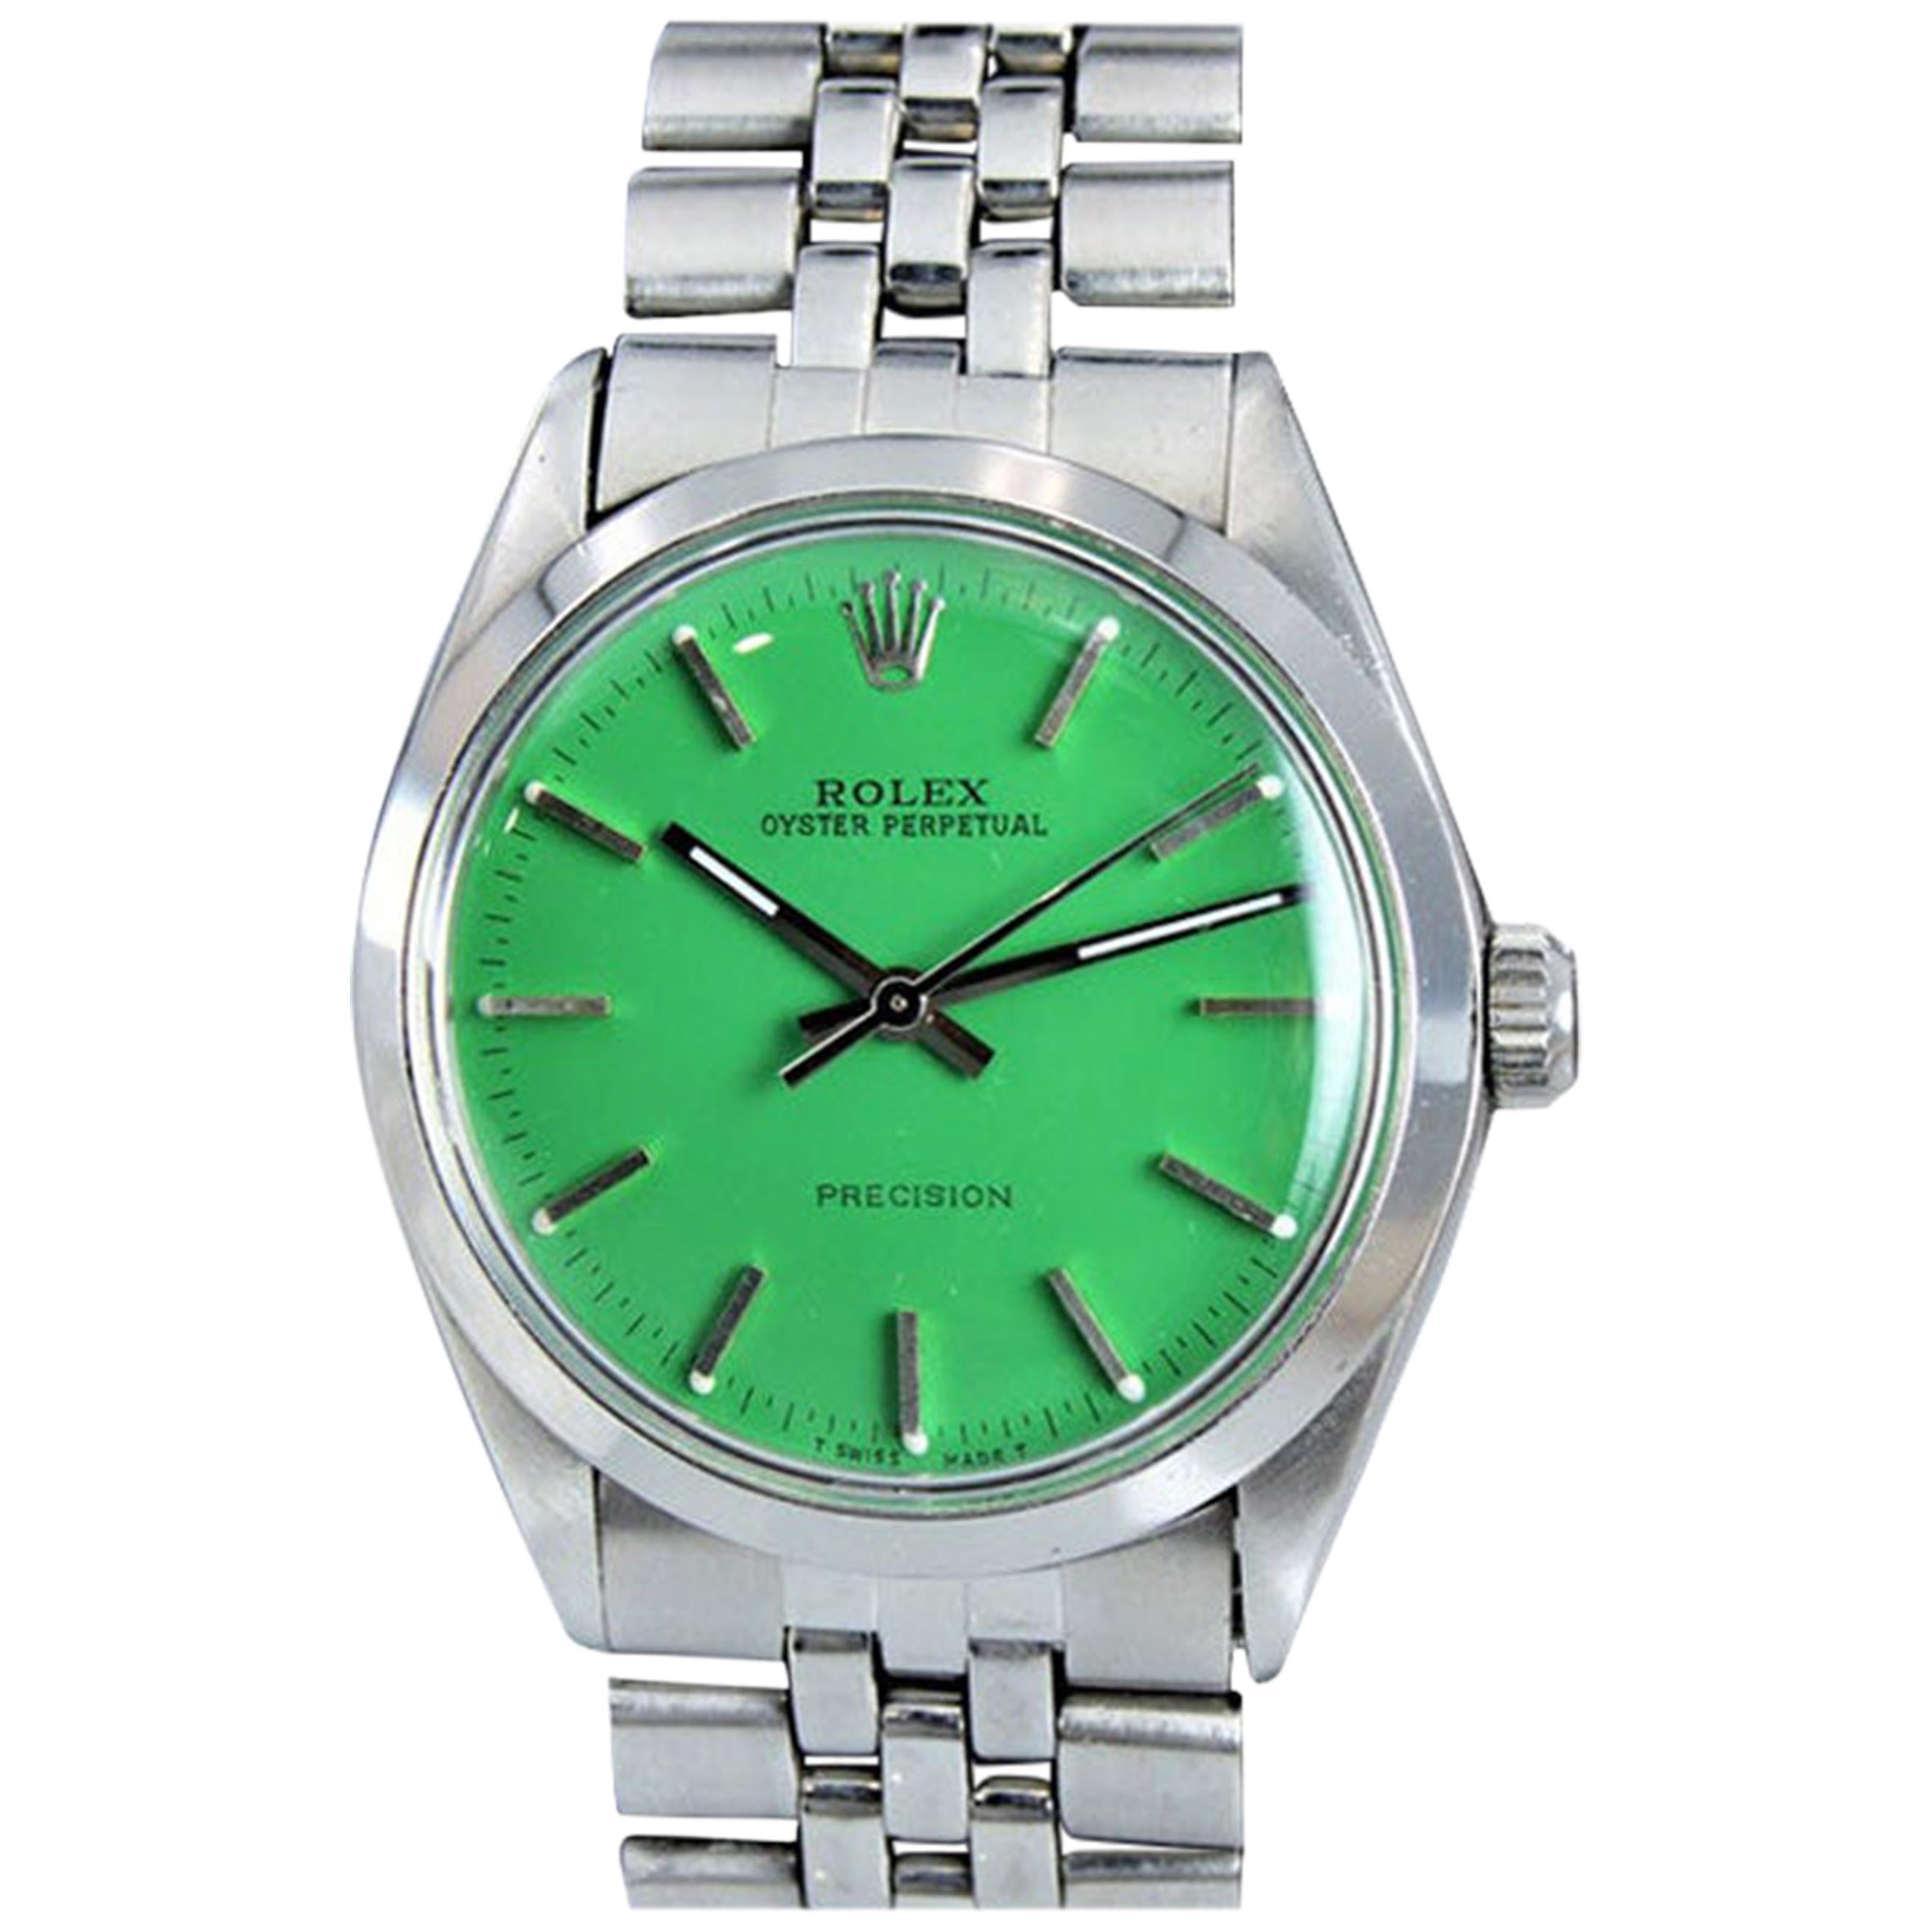 Rolex Stainless Oyster Perpetual Ref 1002 Custom Green Dial, 1970s